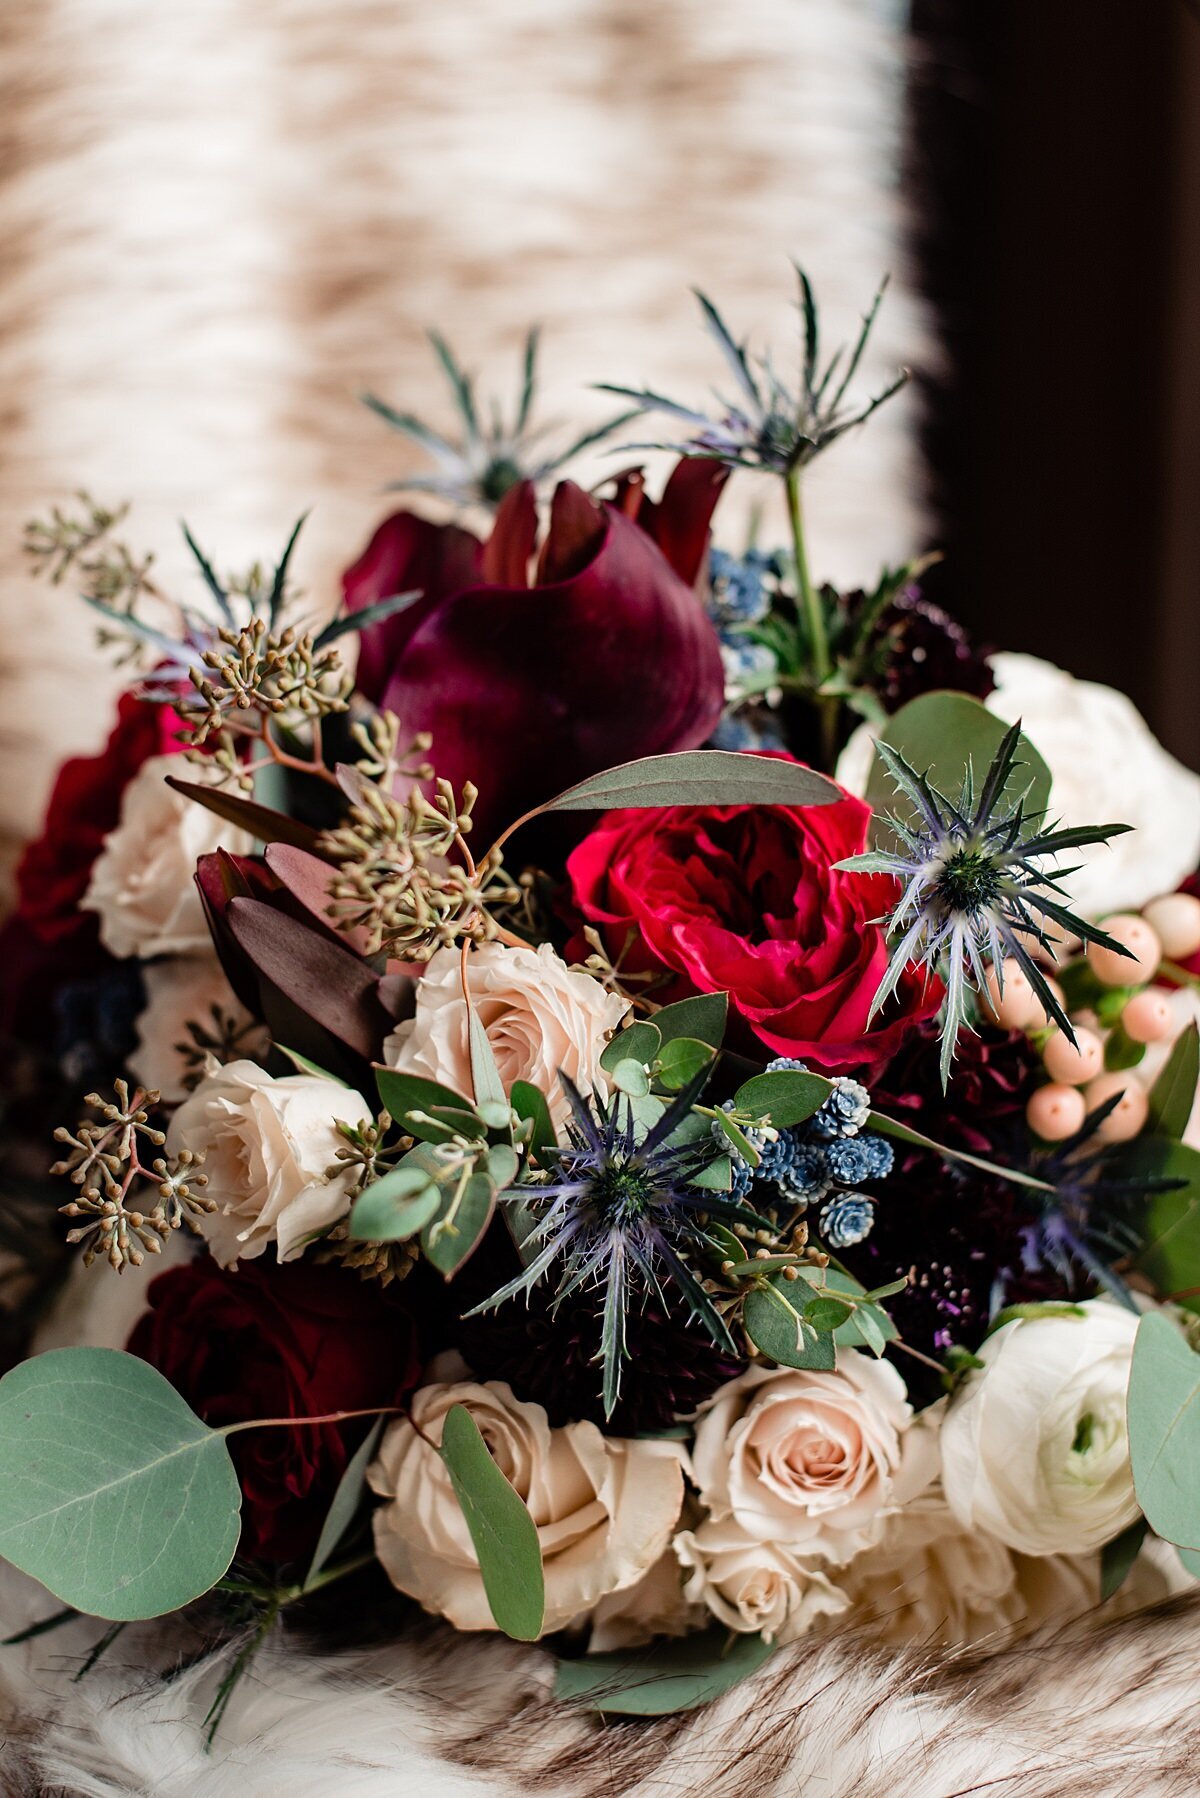 Winter wedding bouquet with red peonies, white roses, blue thistle, red roses, burgundy protea, seeded eucalyptus and silver dollar eucalyptus.